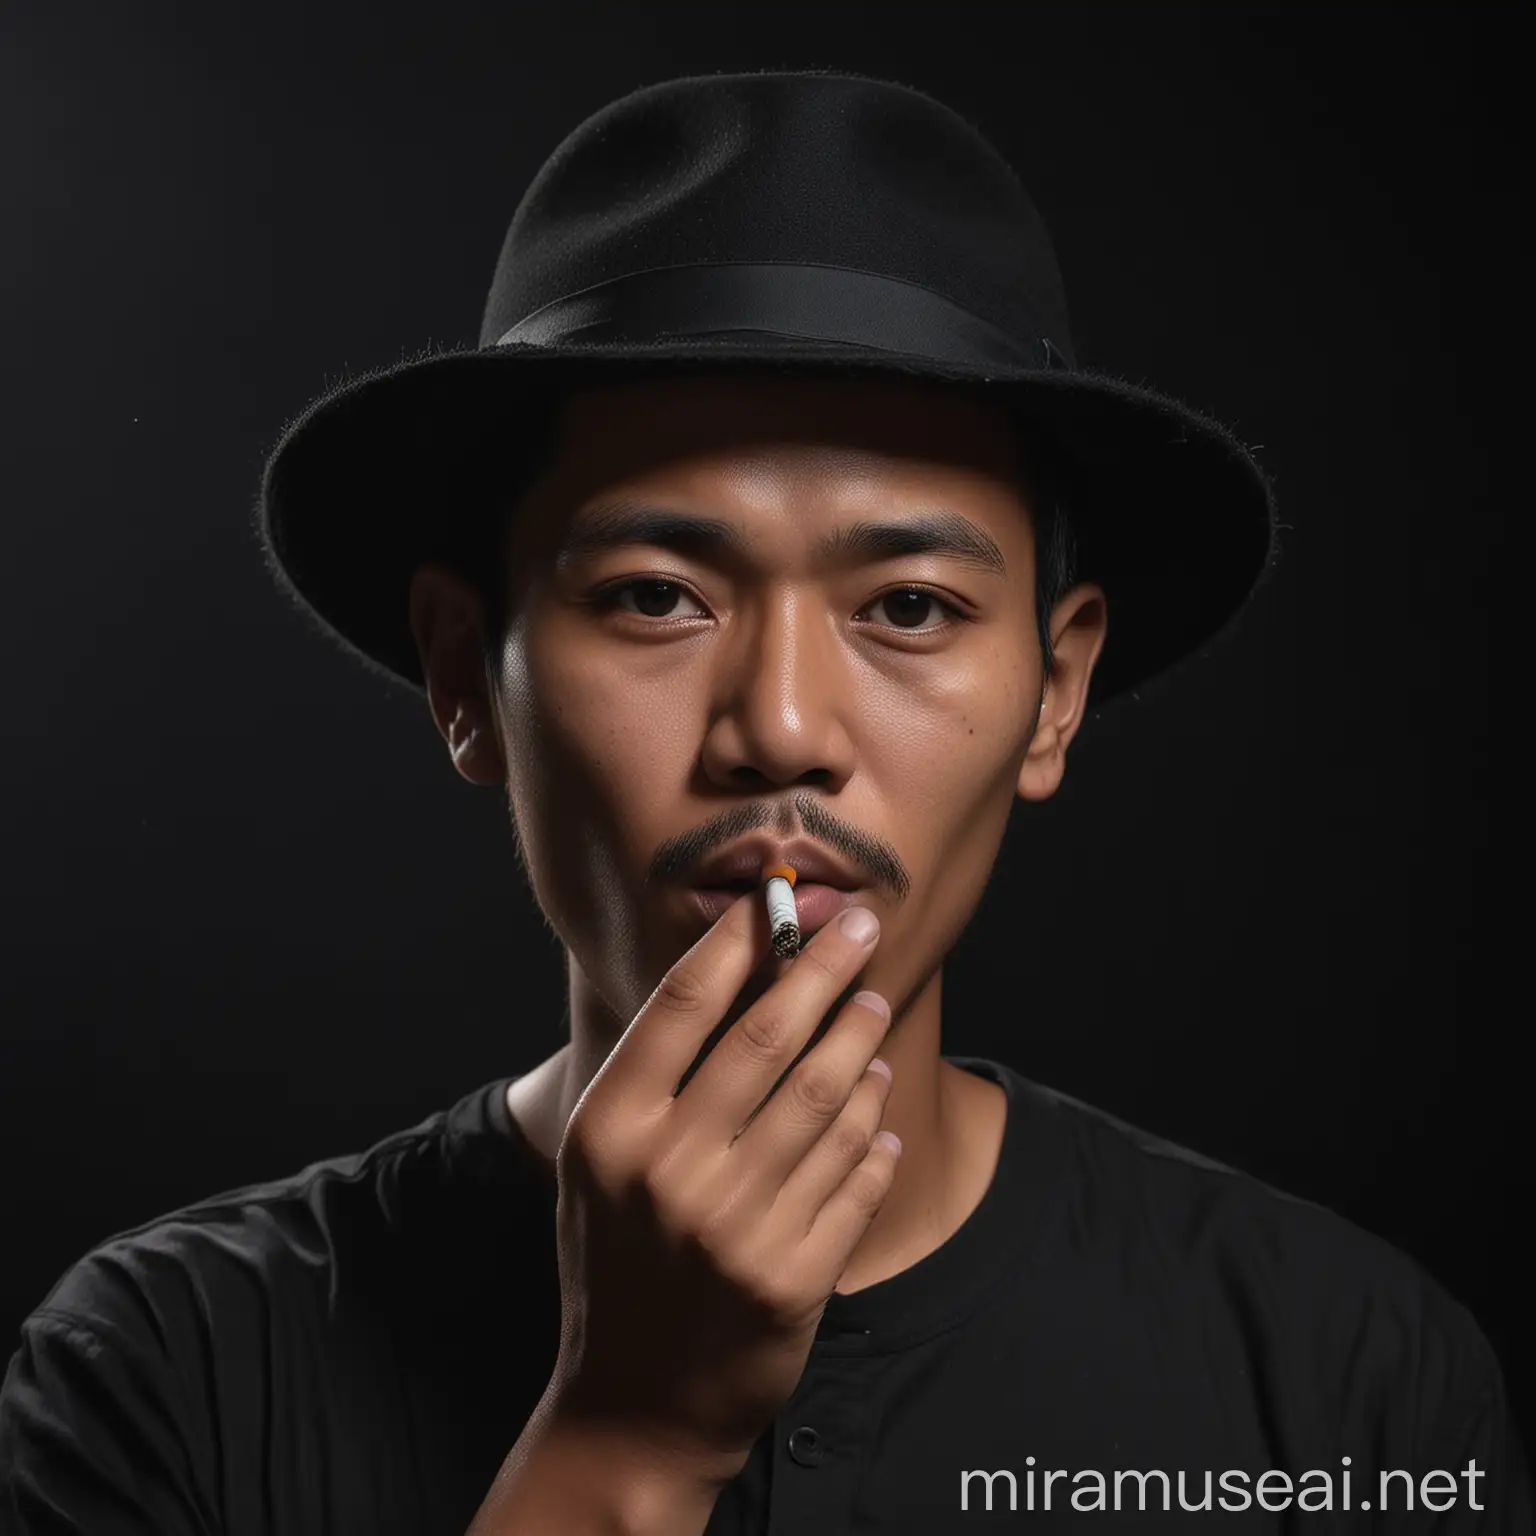 Indonesian Man Portrait with Cigarette in Low Key Lighting